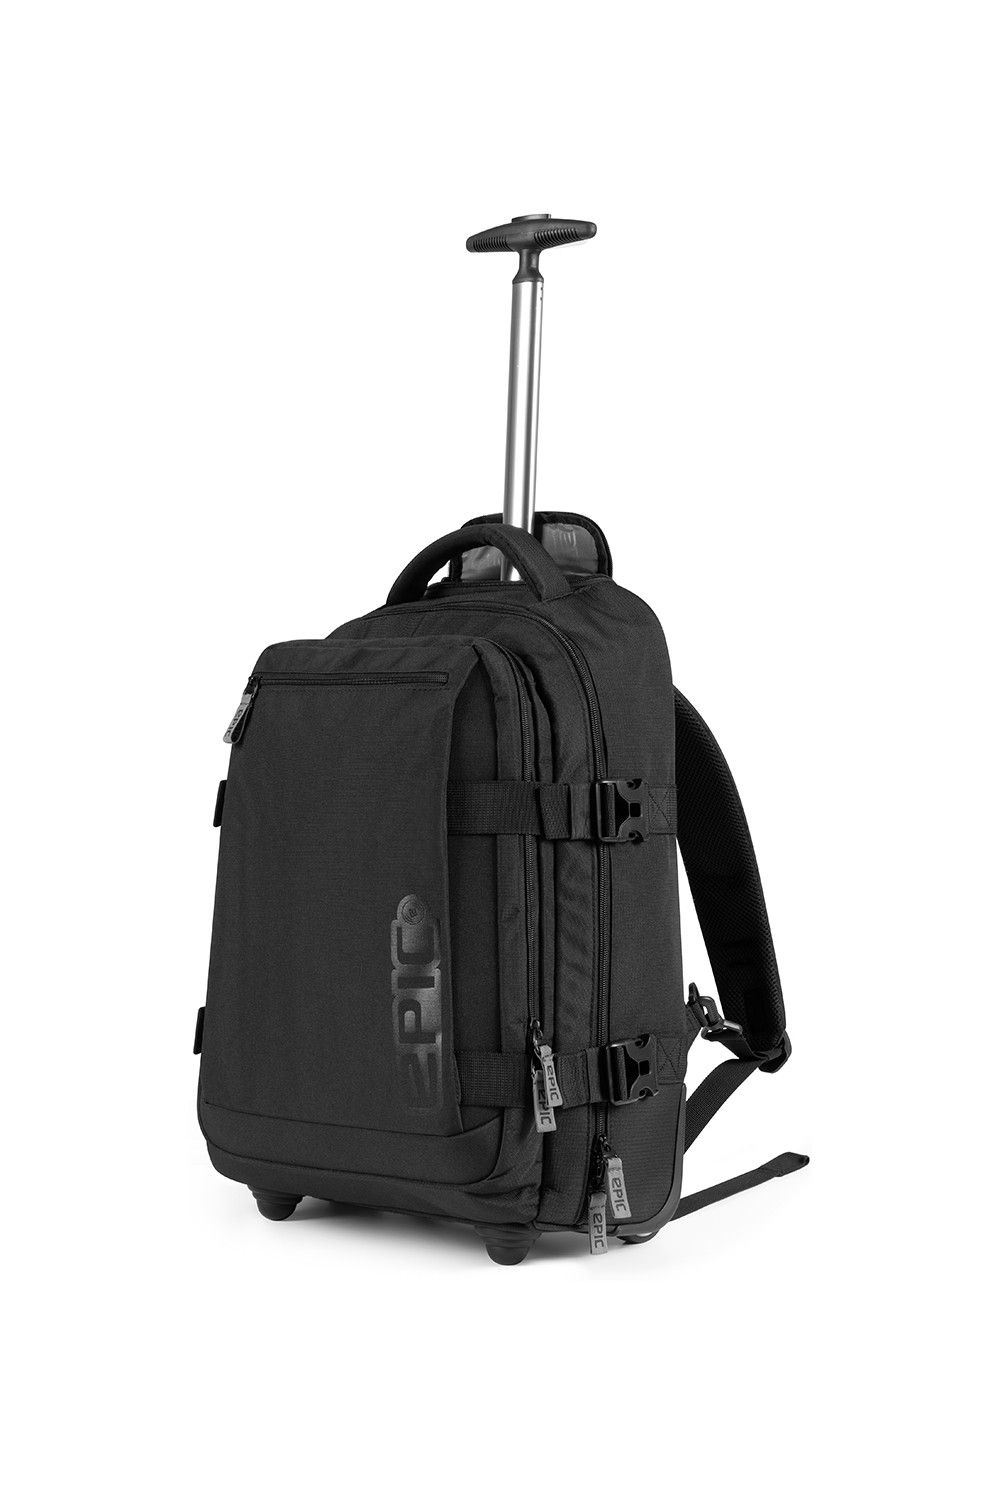 Epic laptop backpack with wheels Explorer 17.3 inch